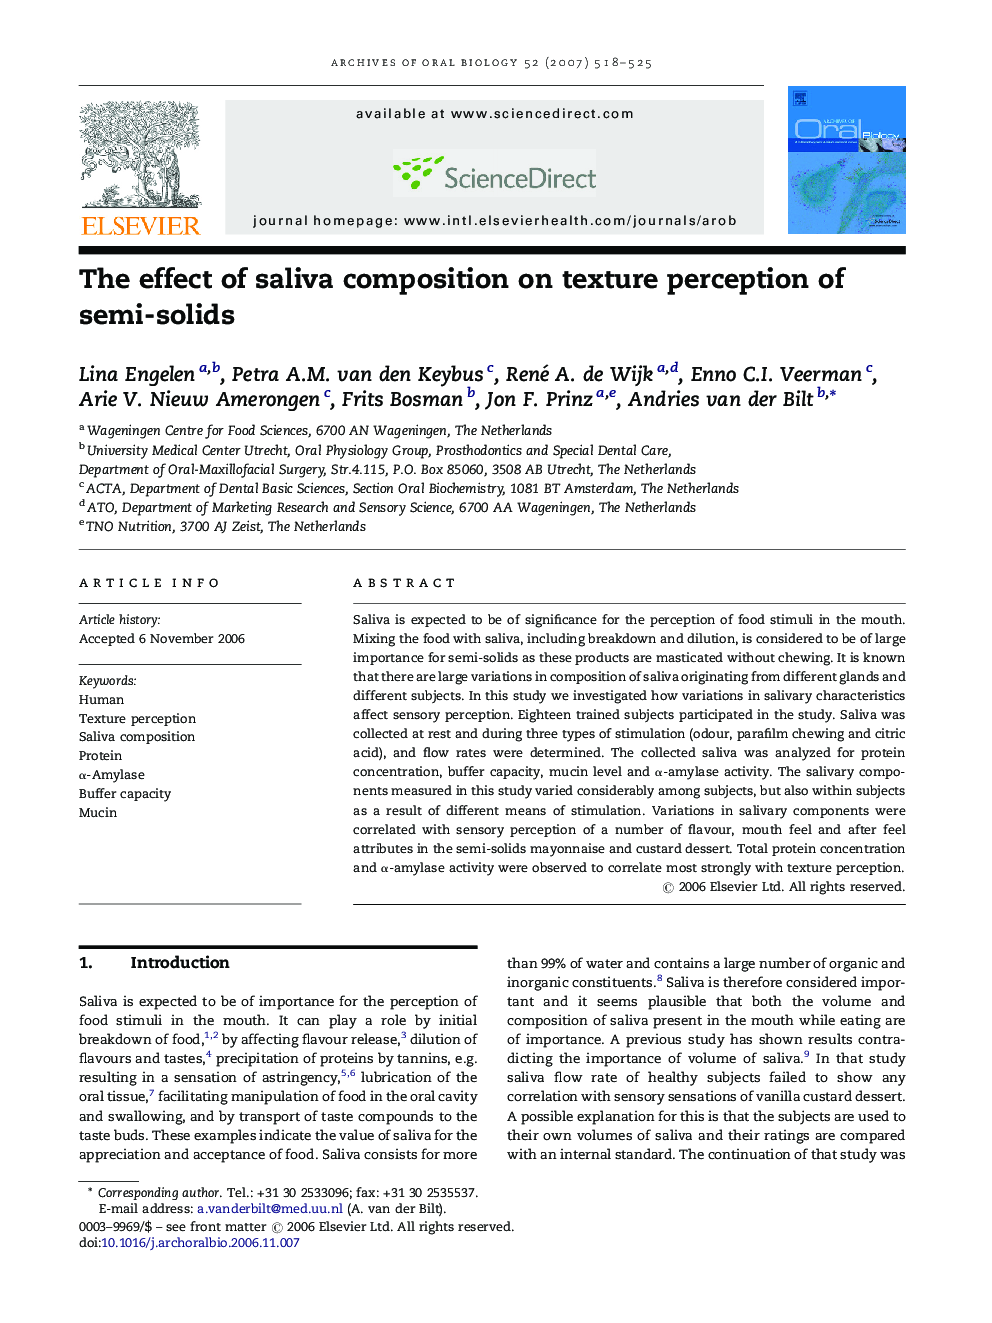 The effect of saliva composition on texture perception of semi-solids